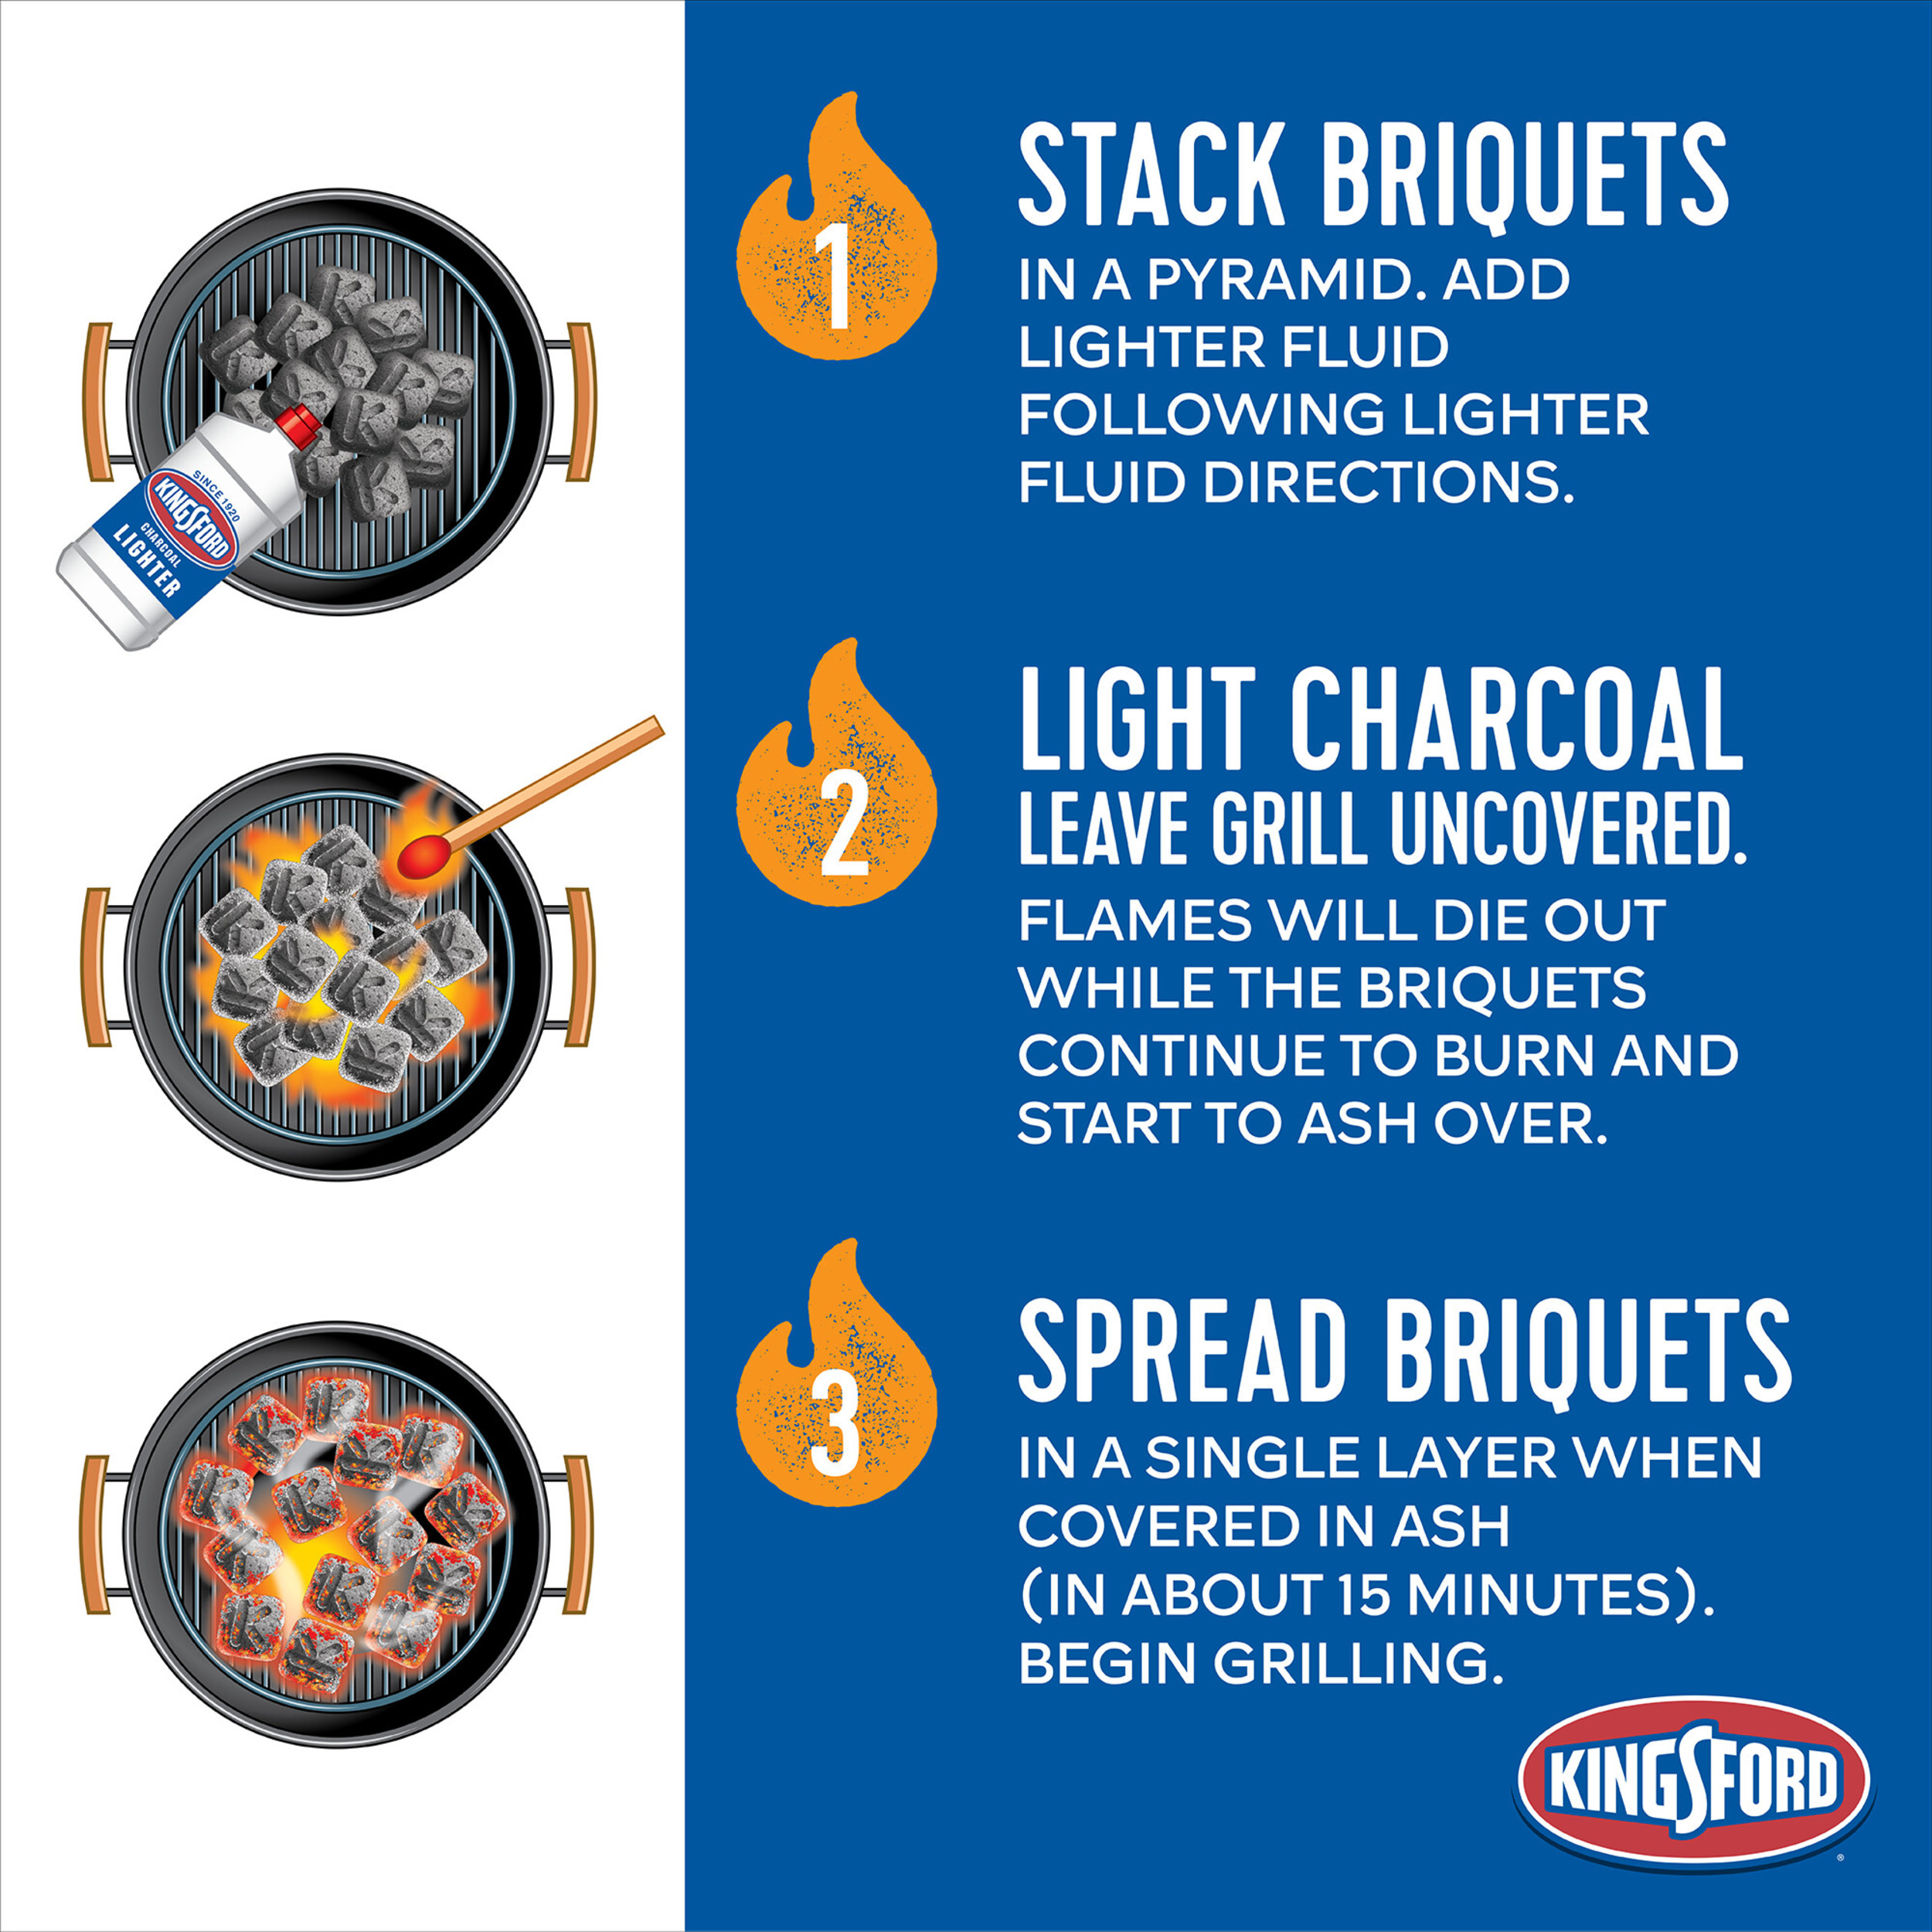 Kingsford Charcoal Briquettes with Classic Hickory, BBQ Charcoal for Grilling, 16 Pounds - image 3 of 16